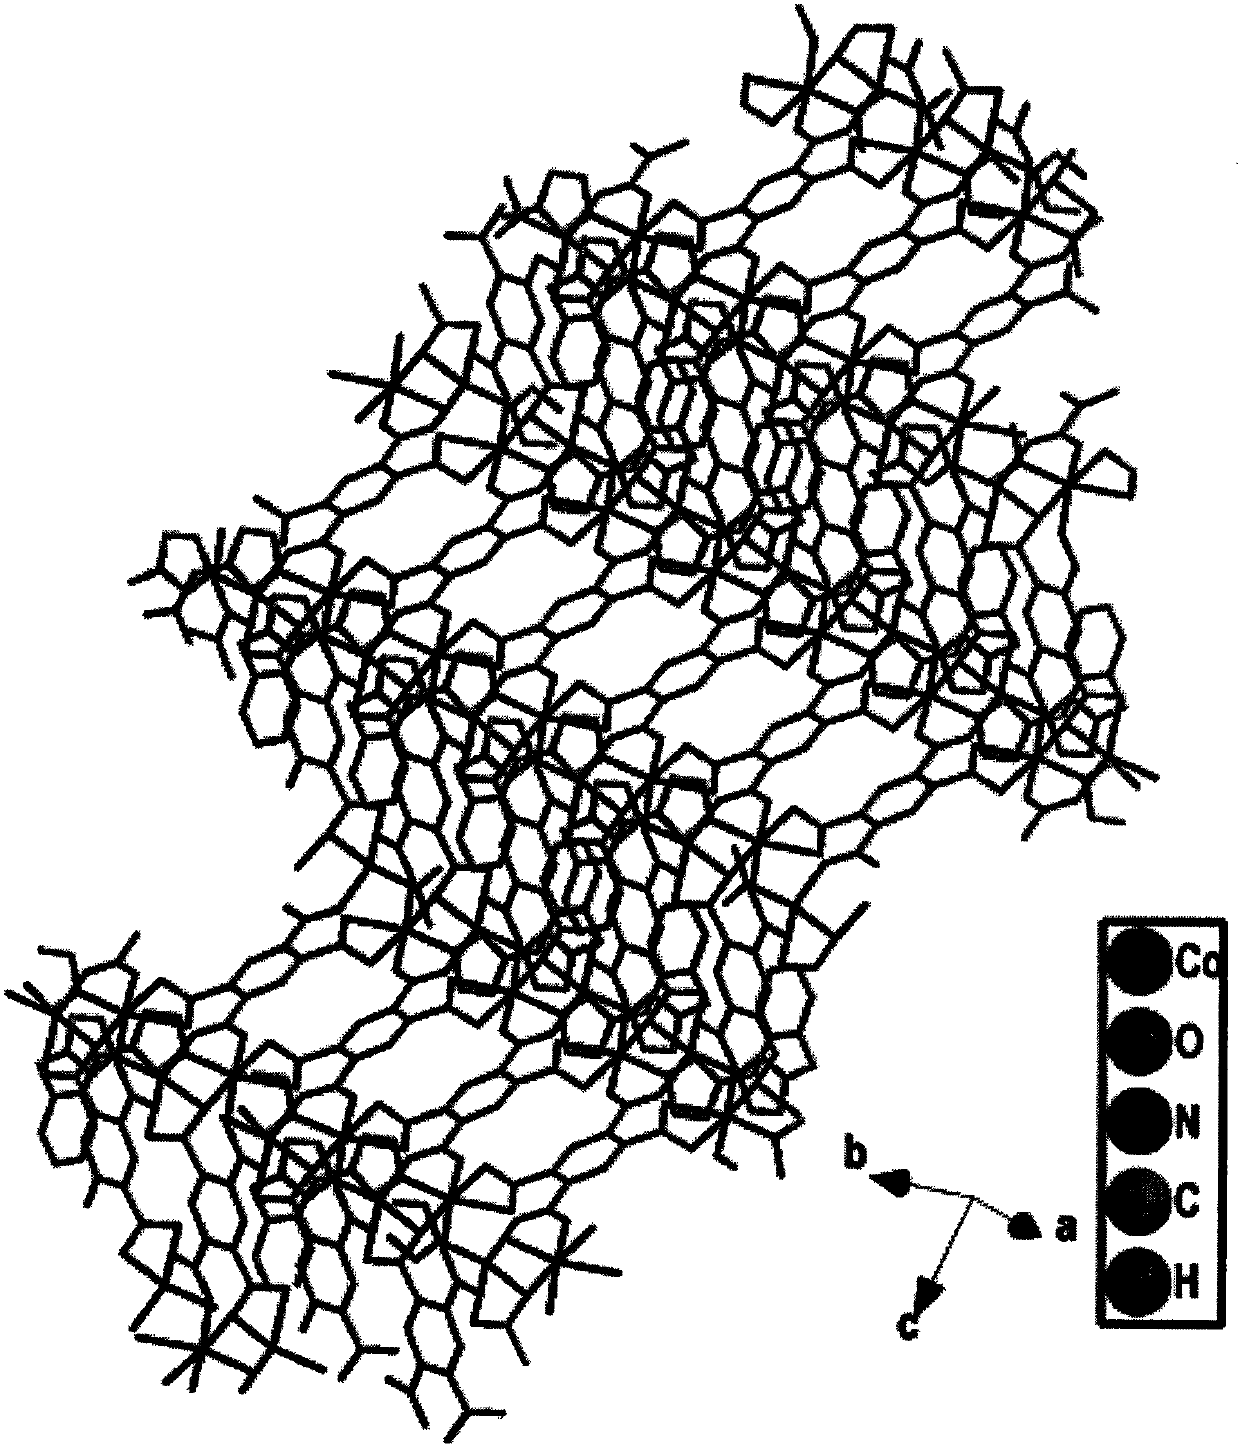 A co-bis-imidazolium metal framework compound and its preparation method and application